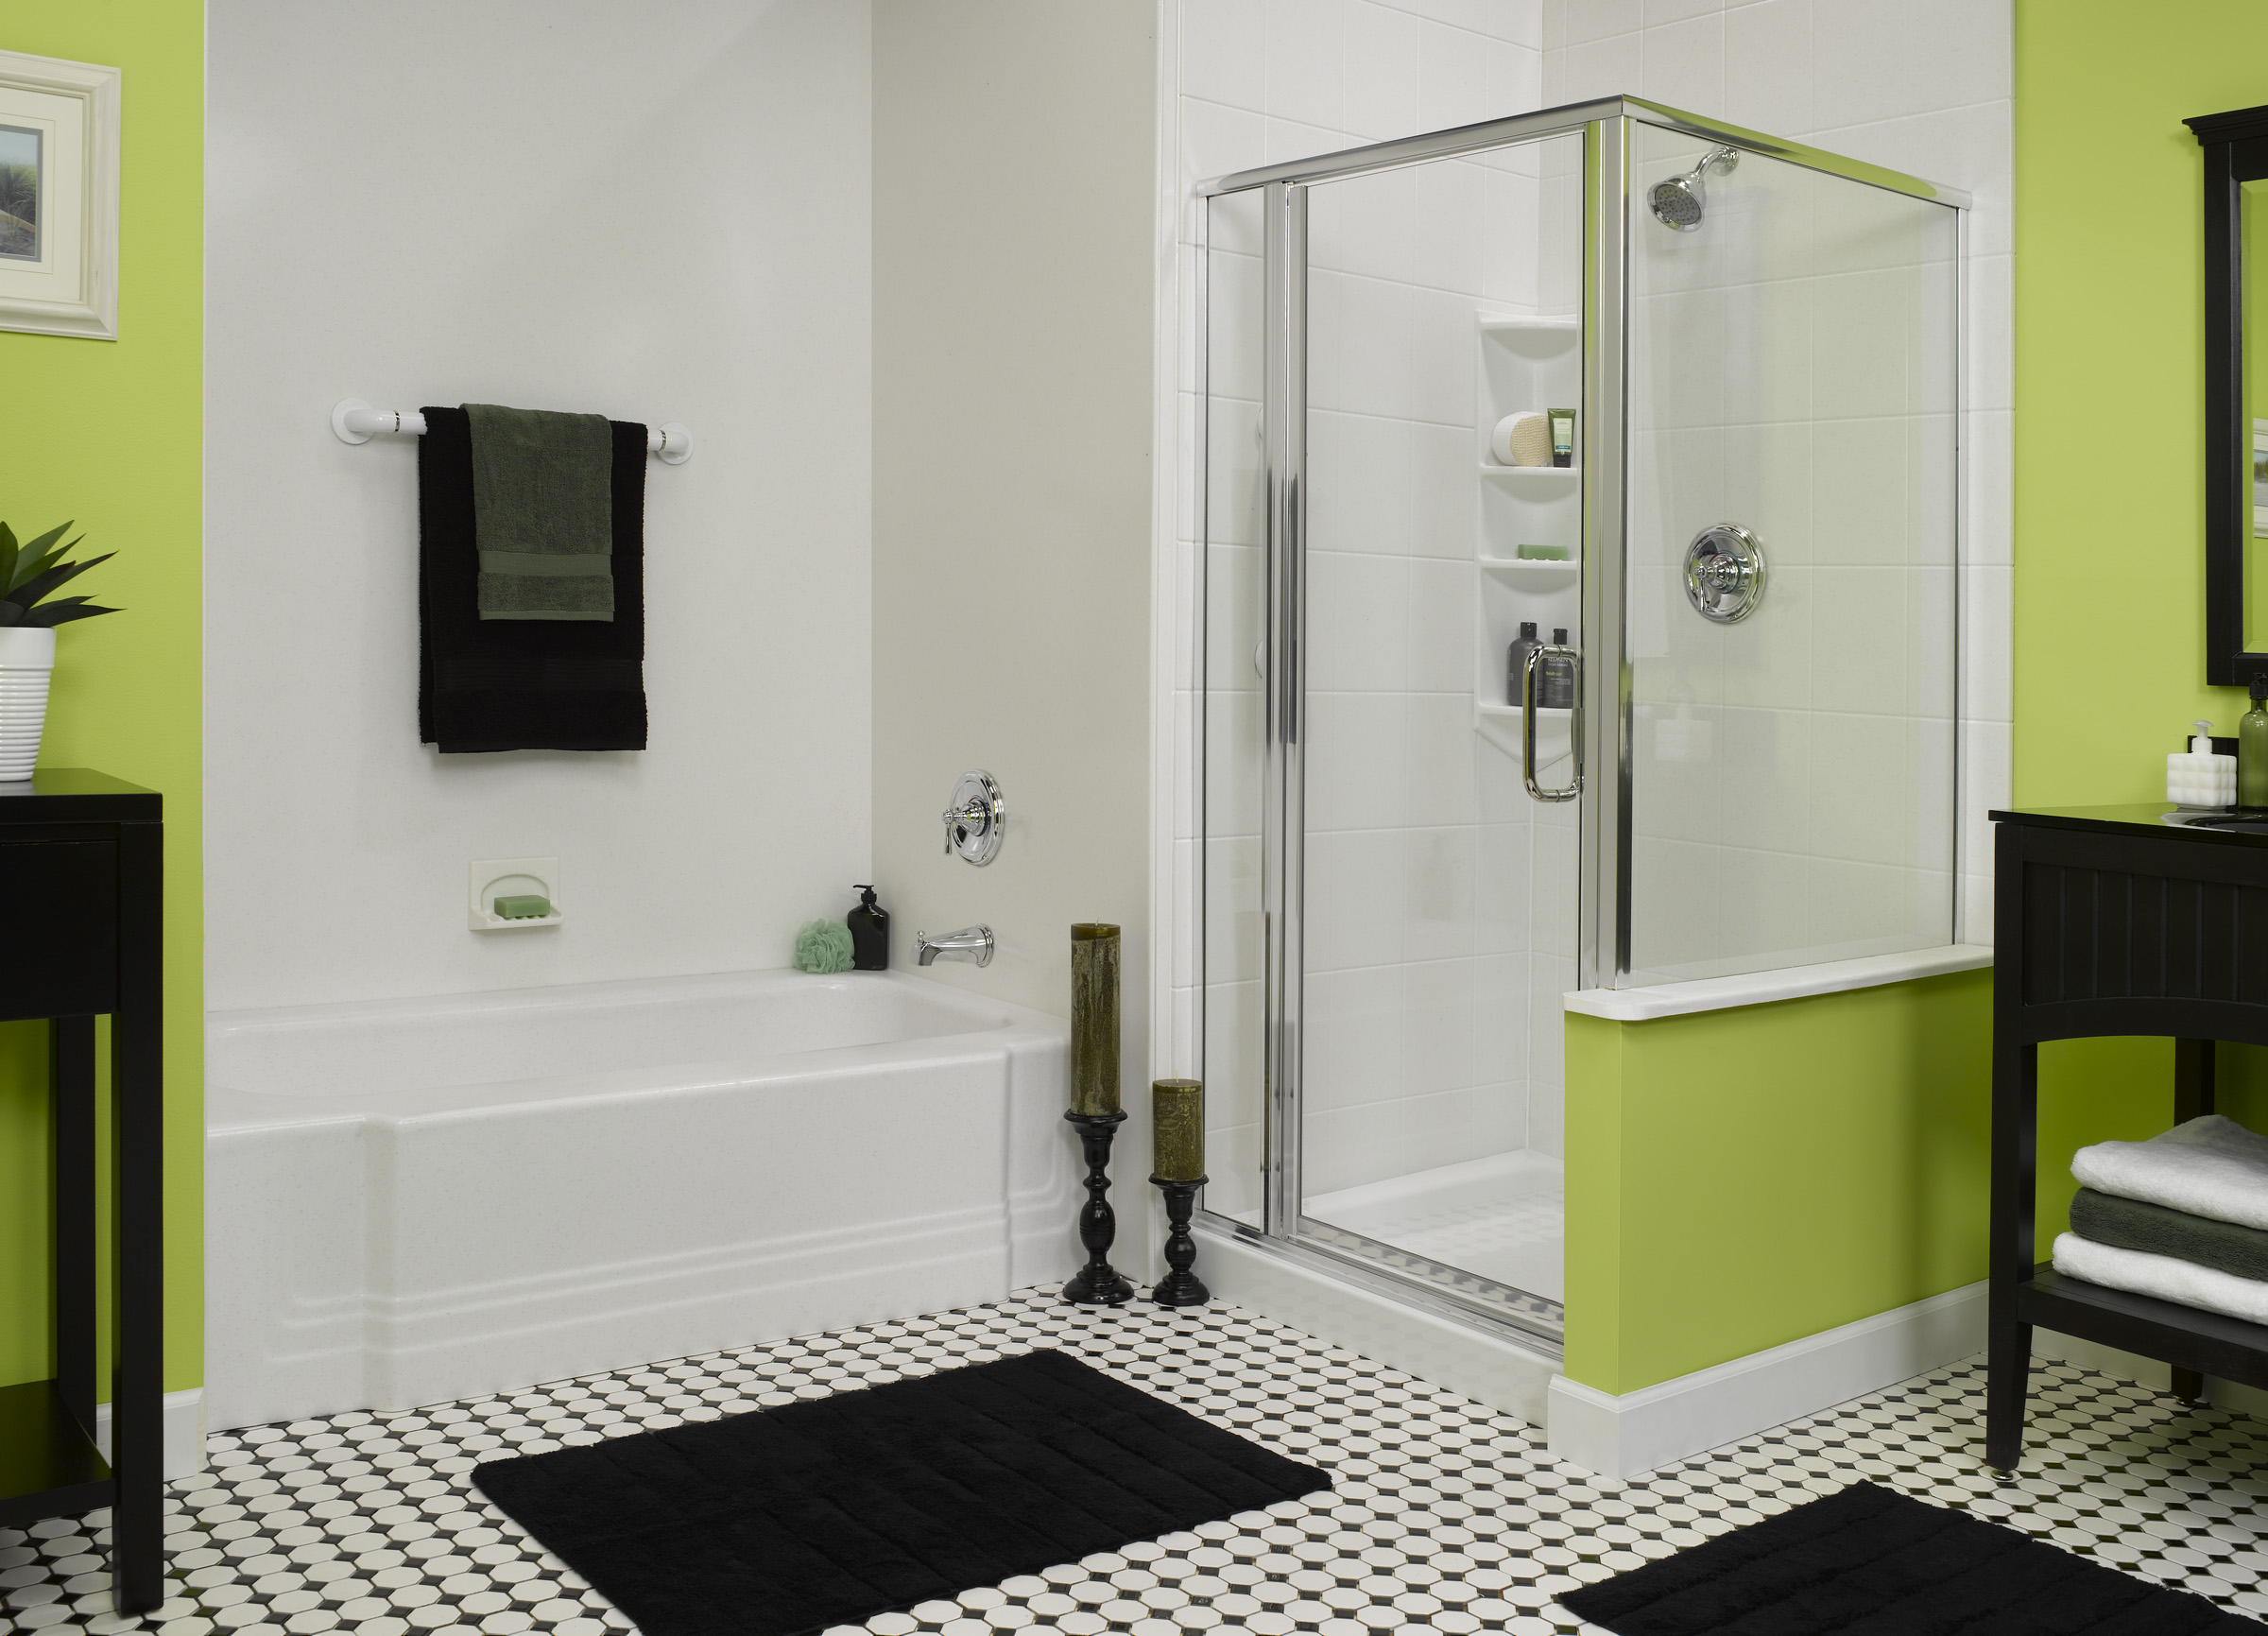 Best Small Bathroom Designs With Little Green And White Wall Hanger Towel Black Fur Rug Floor Wash Stand Mirror Sink Lighting Floor Shower Glass Room Soap Towel And Mini Table Bathroom